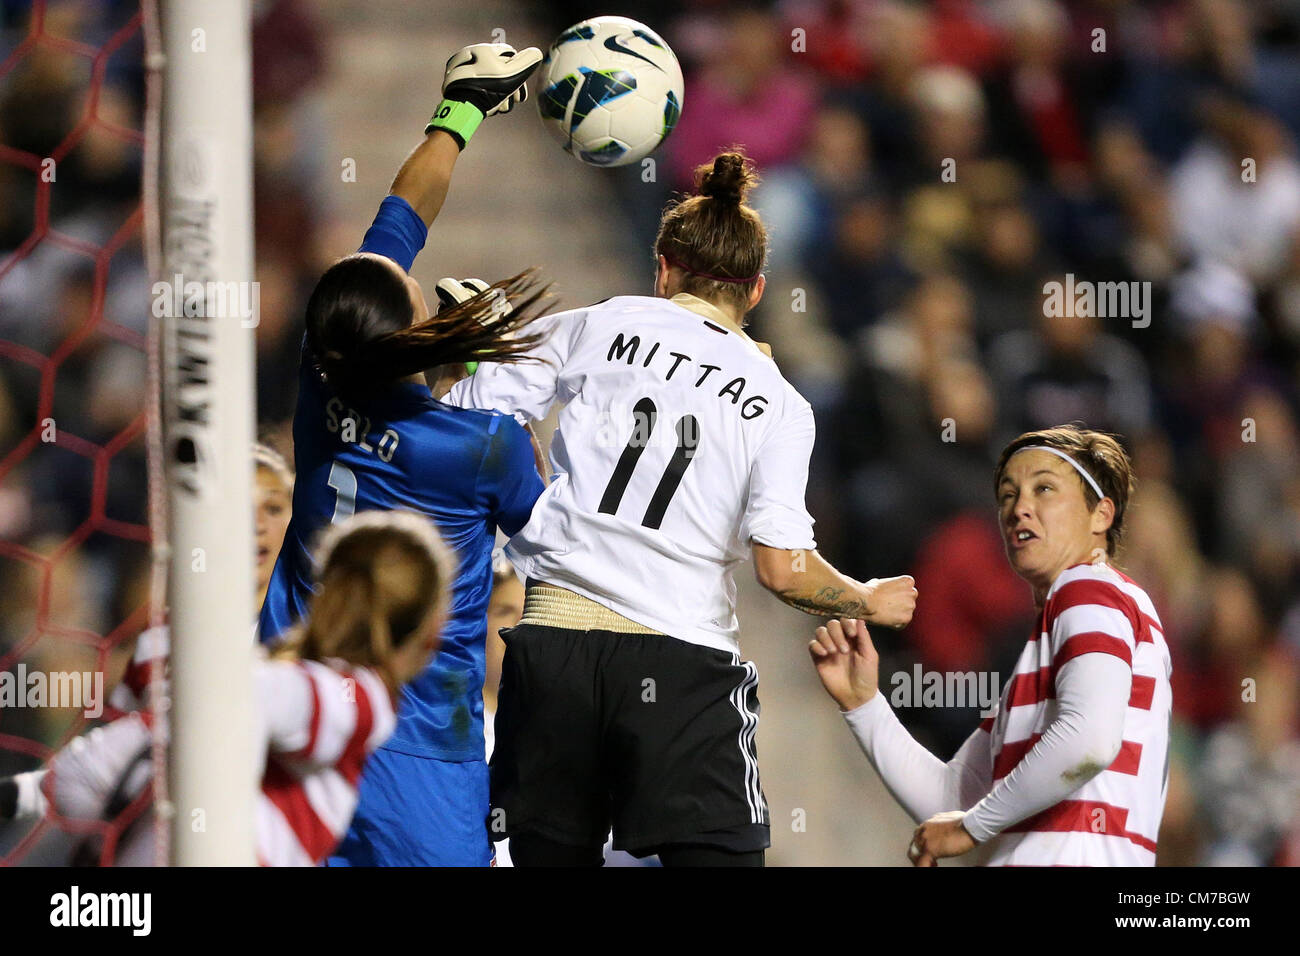 20.10.2012. Chicago, USA.  Hope Solo (USA) (1) punches the ball away from Anja Mittag (GER) (11) and Abby Wambach (USA) (right). The United States Women's National Team played the Germany Women's National Team at Toyota Park in Bridgeview, Illinois in a women's international friendly soccer match. The game ended in a 1-1 tie. Stock Photo